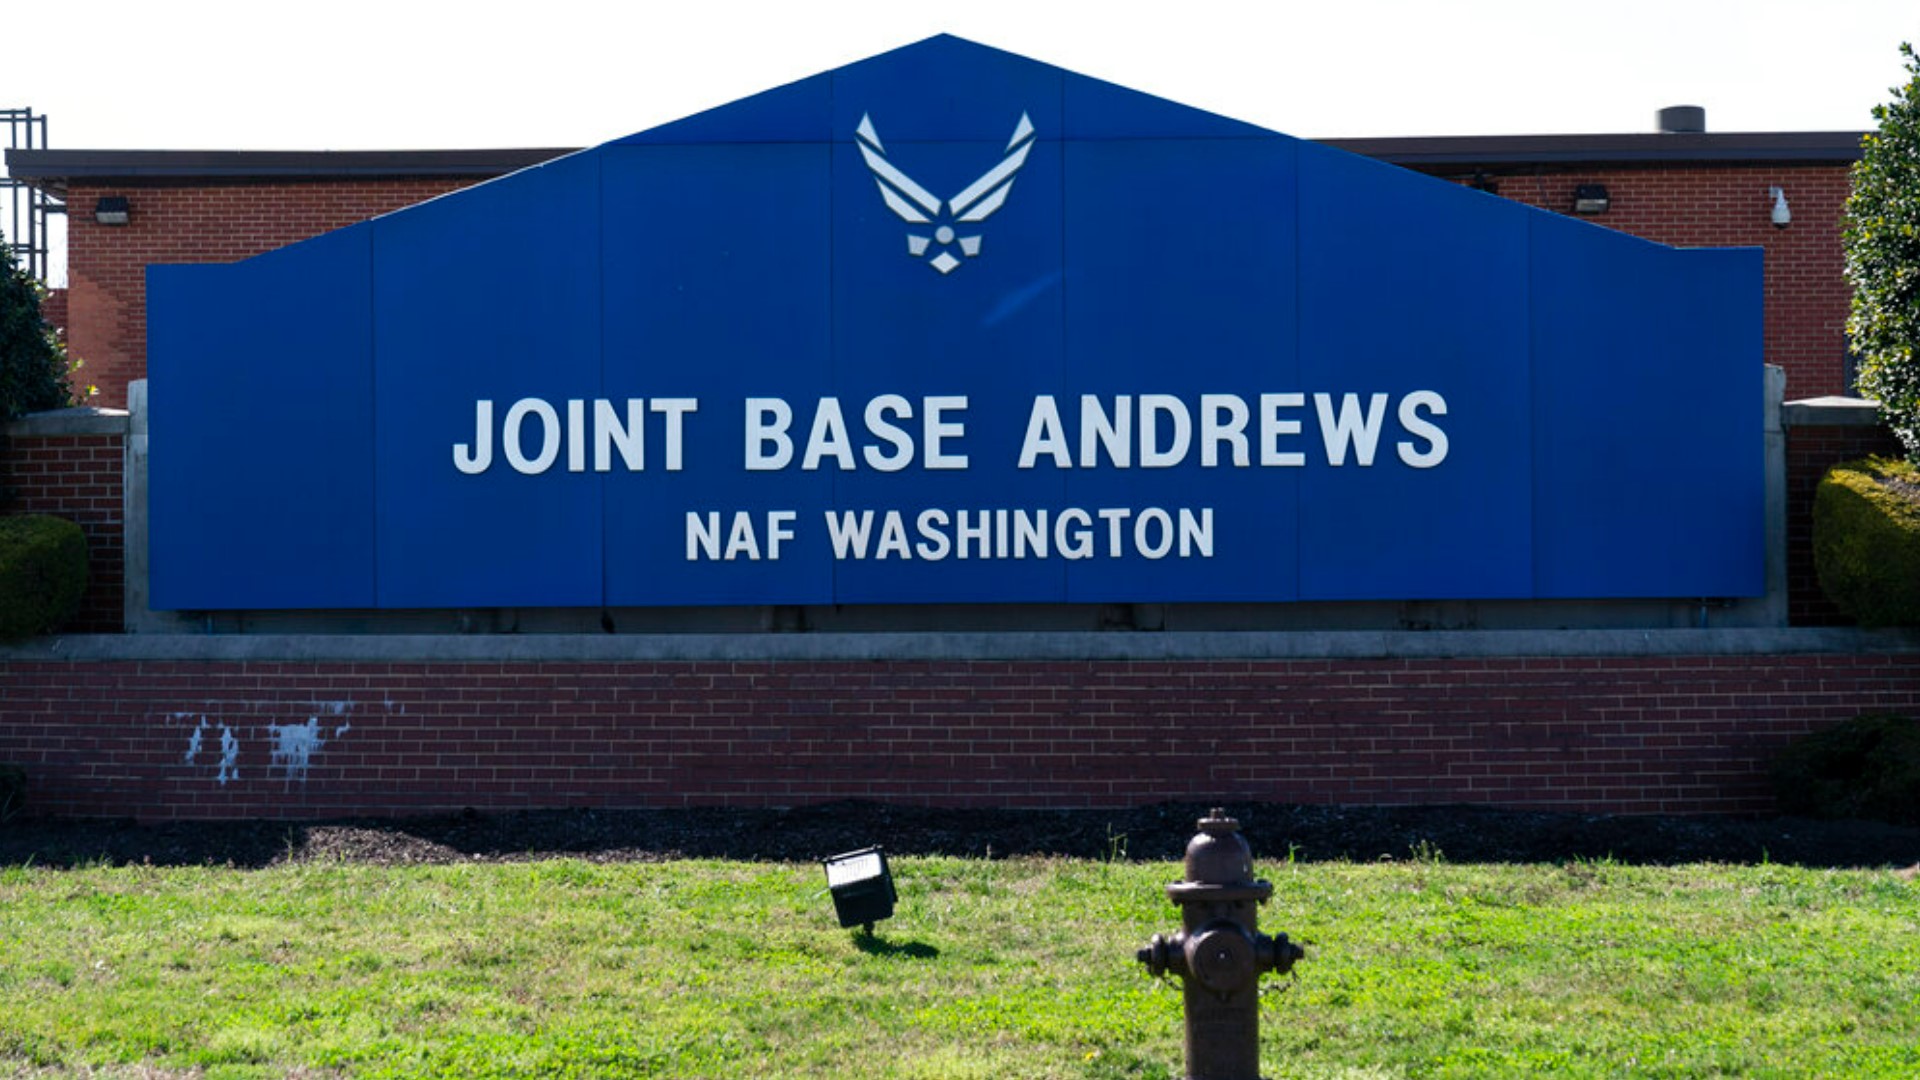 Joint Base Andrews is home to the fleet of presidential aircraft, including Air Force One and Marine One.